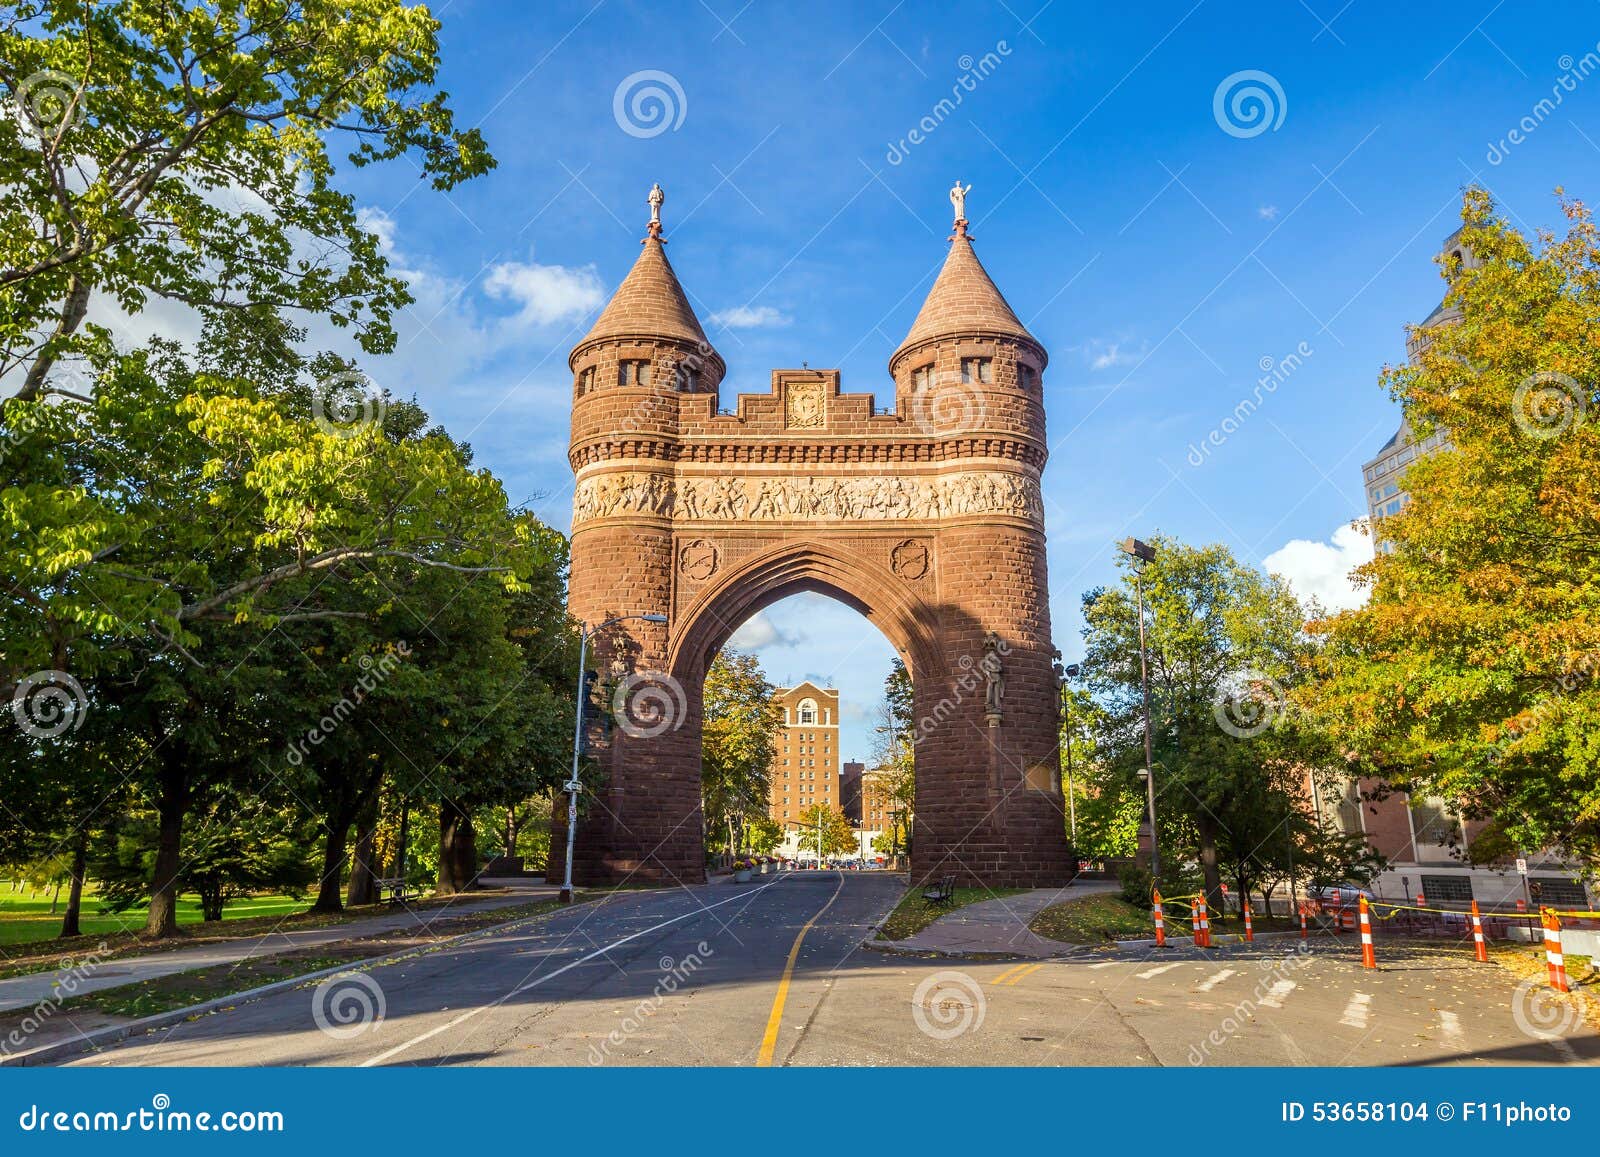 soldiers and sailors memorial arch in hartford.